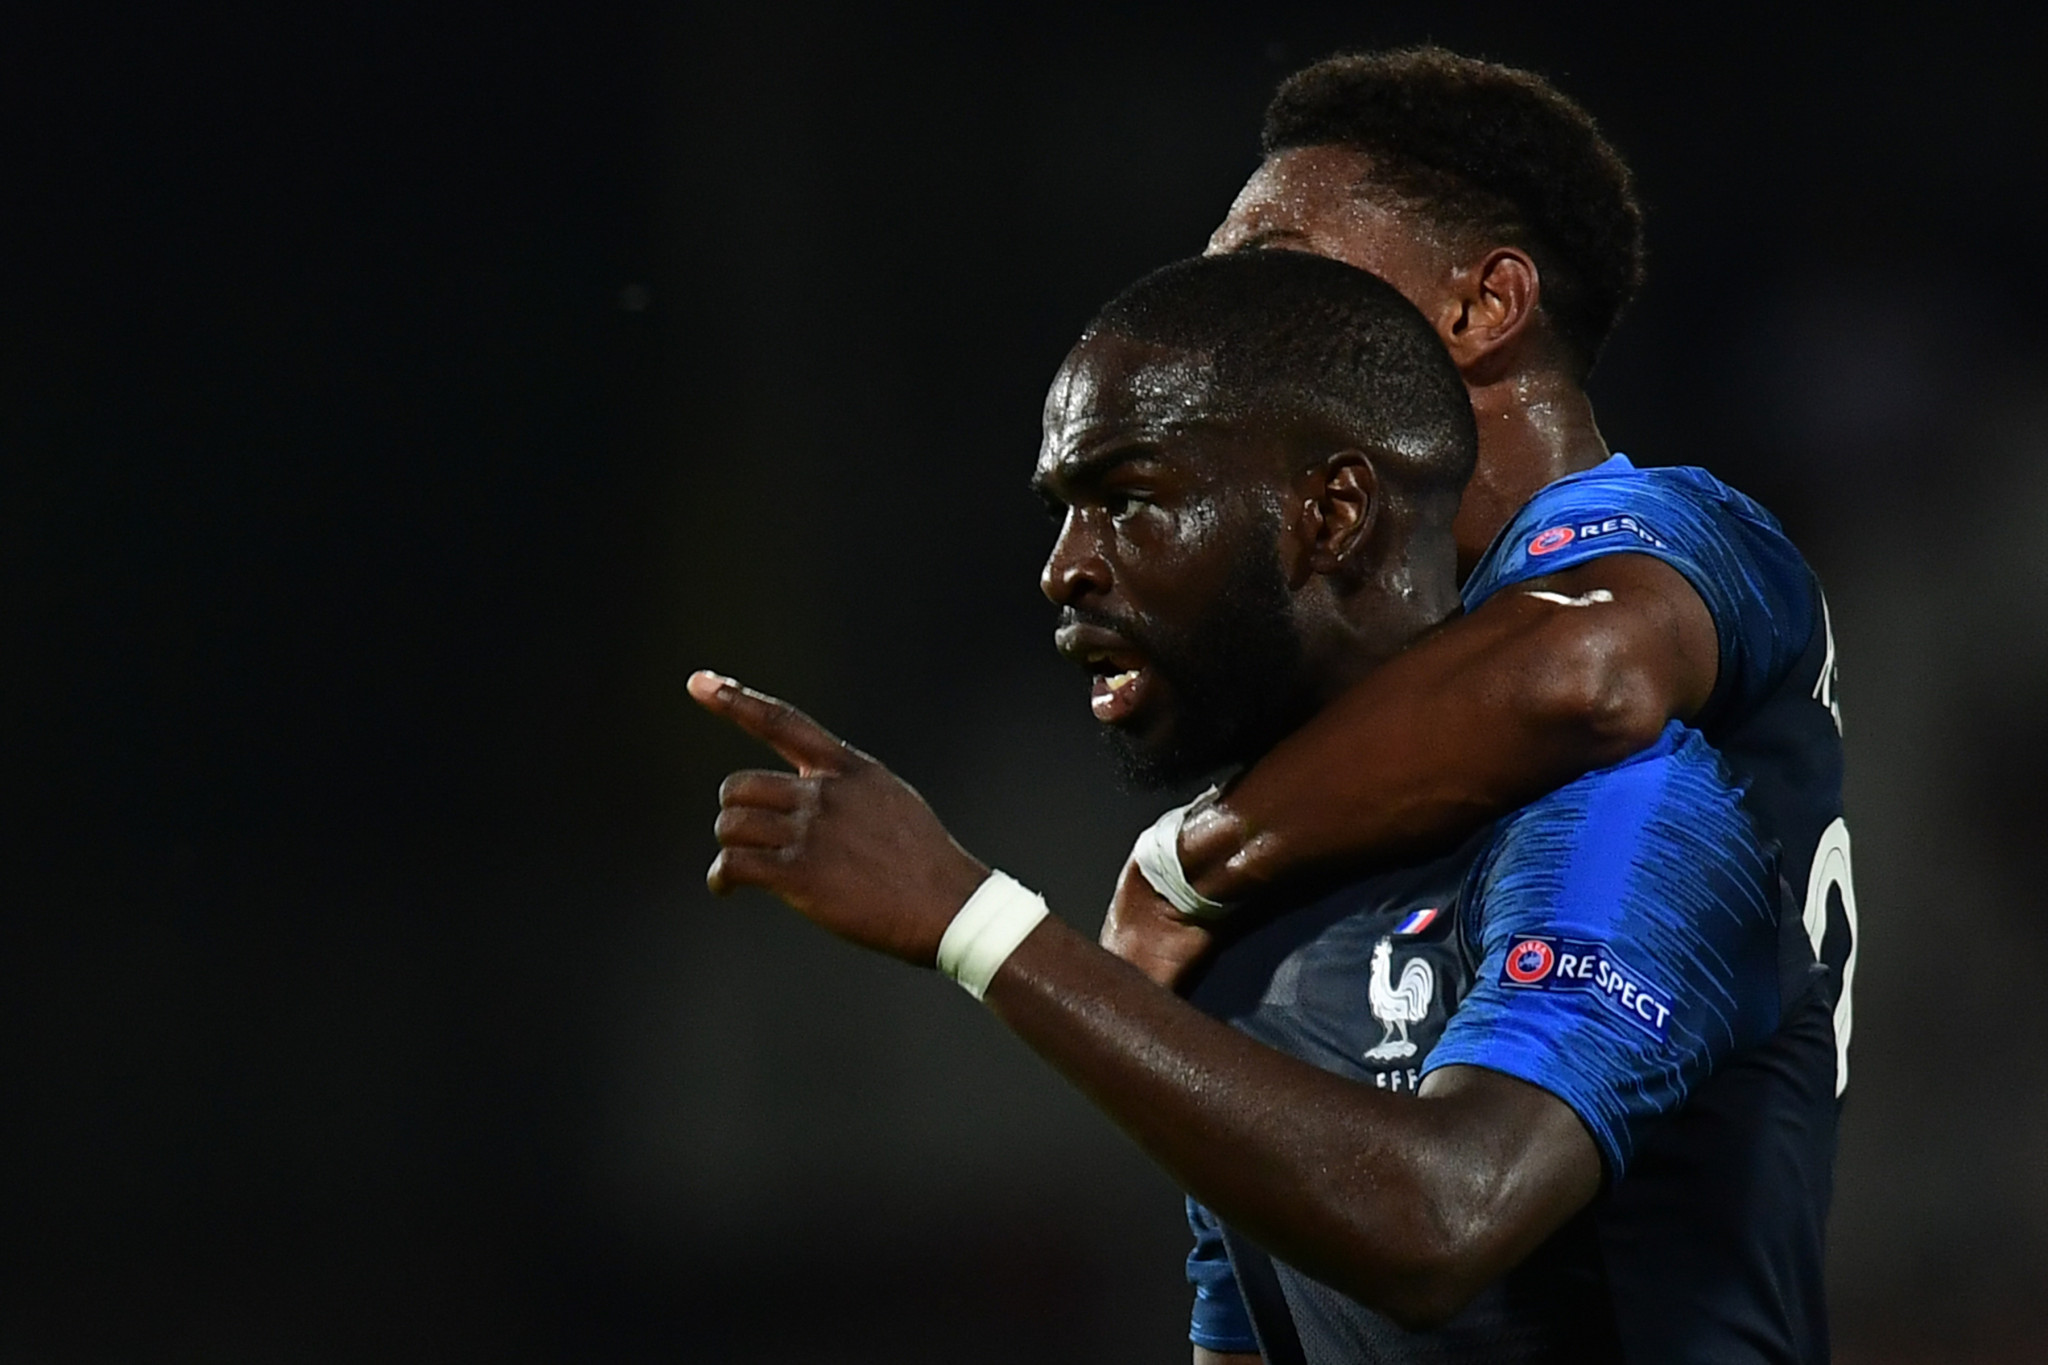 France miss two penalties but snatch late victory against England at UEFA European Under-21 Championship